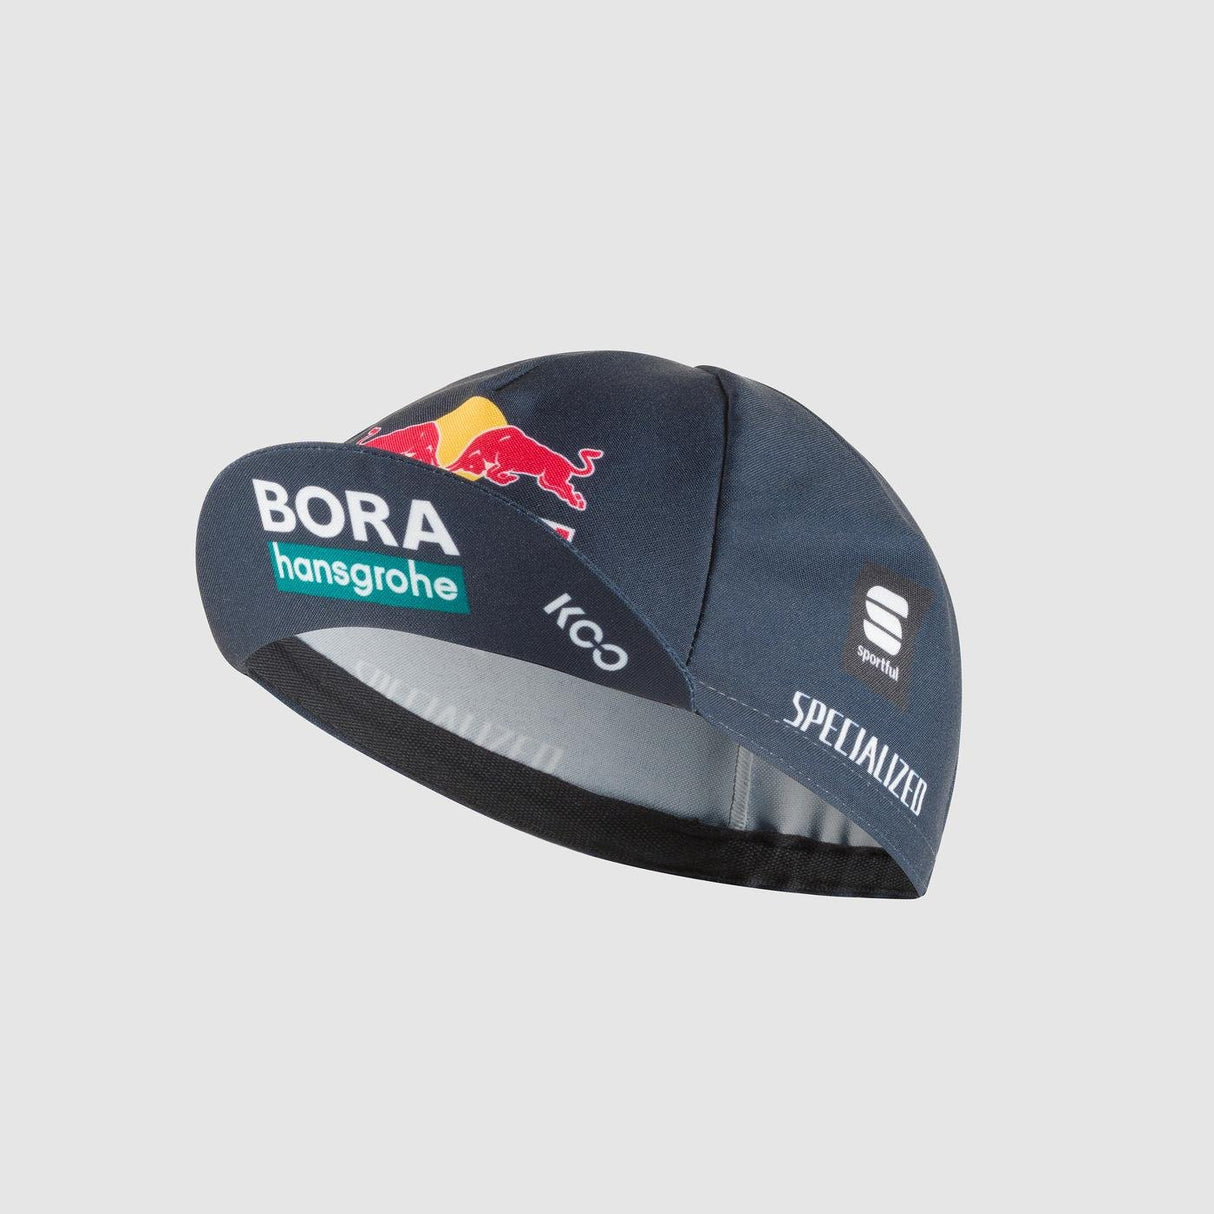 Red Bull Bora Hansgrohe LIMITED KIT  Tour de France CYCLING CAP